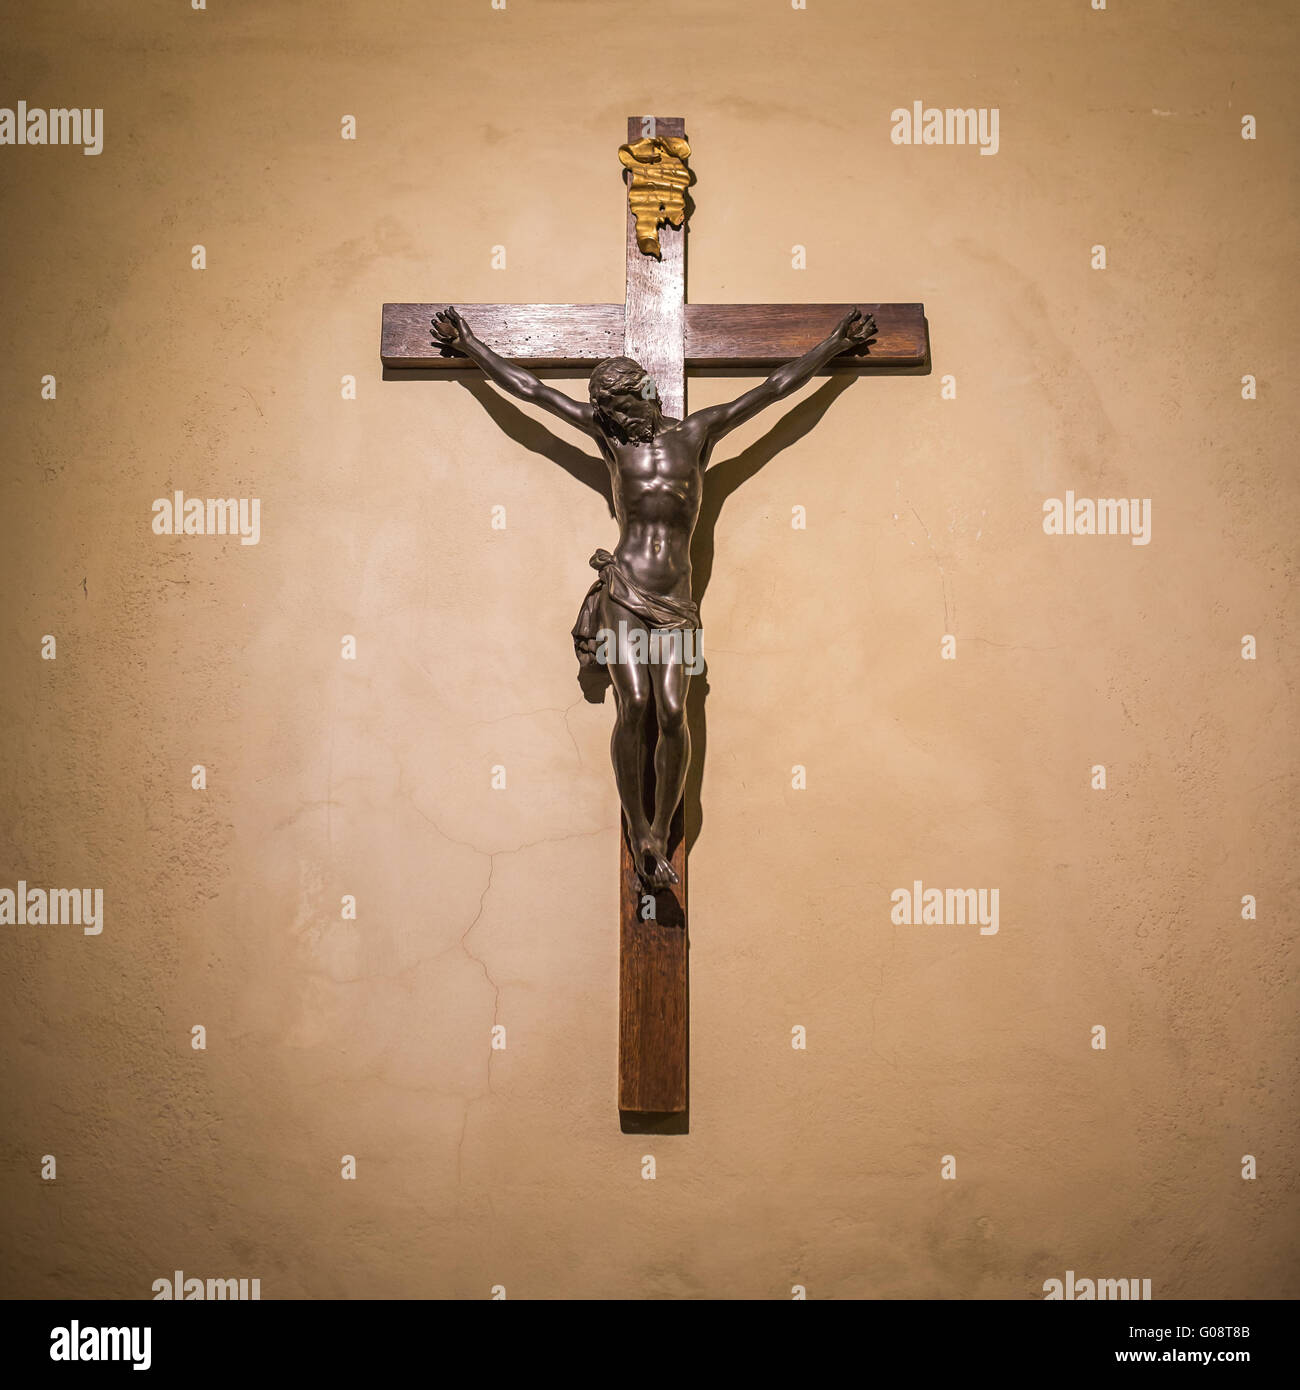 Crucifix on wall in spotlight. Jesus Christ on cross. Religion, belief and hope. Holy and sacred places. Stock Photo